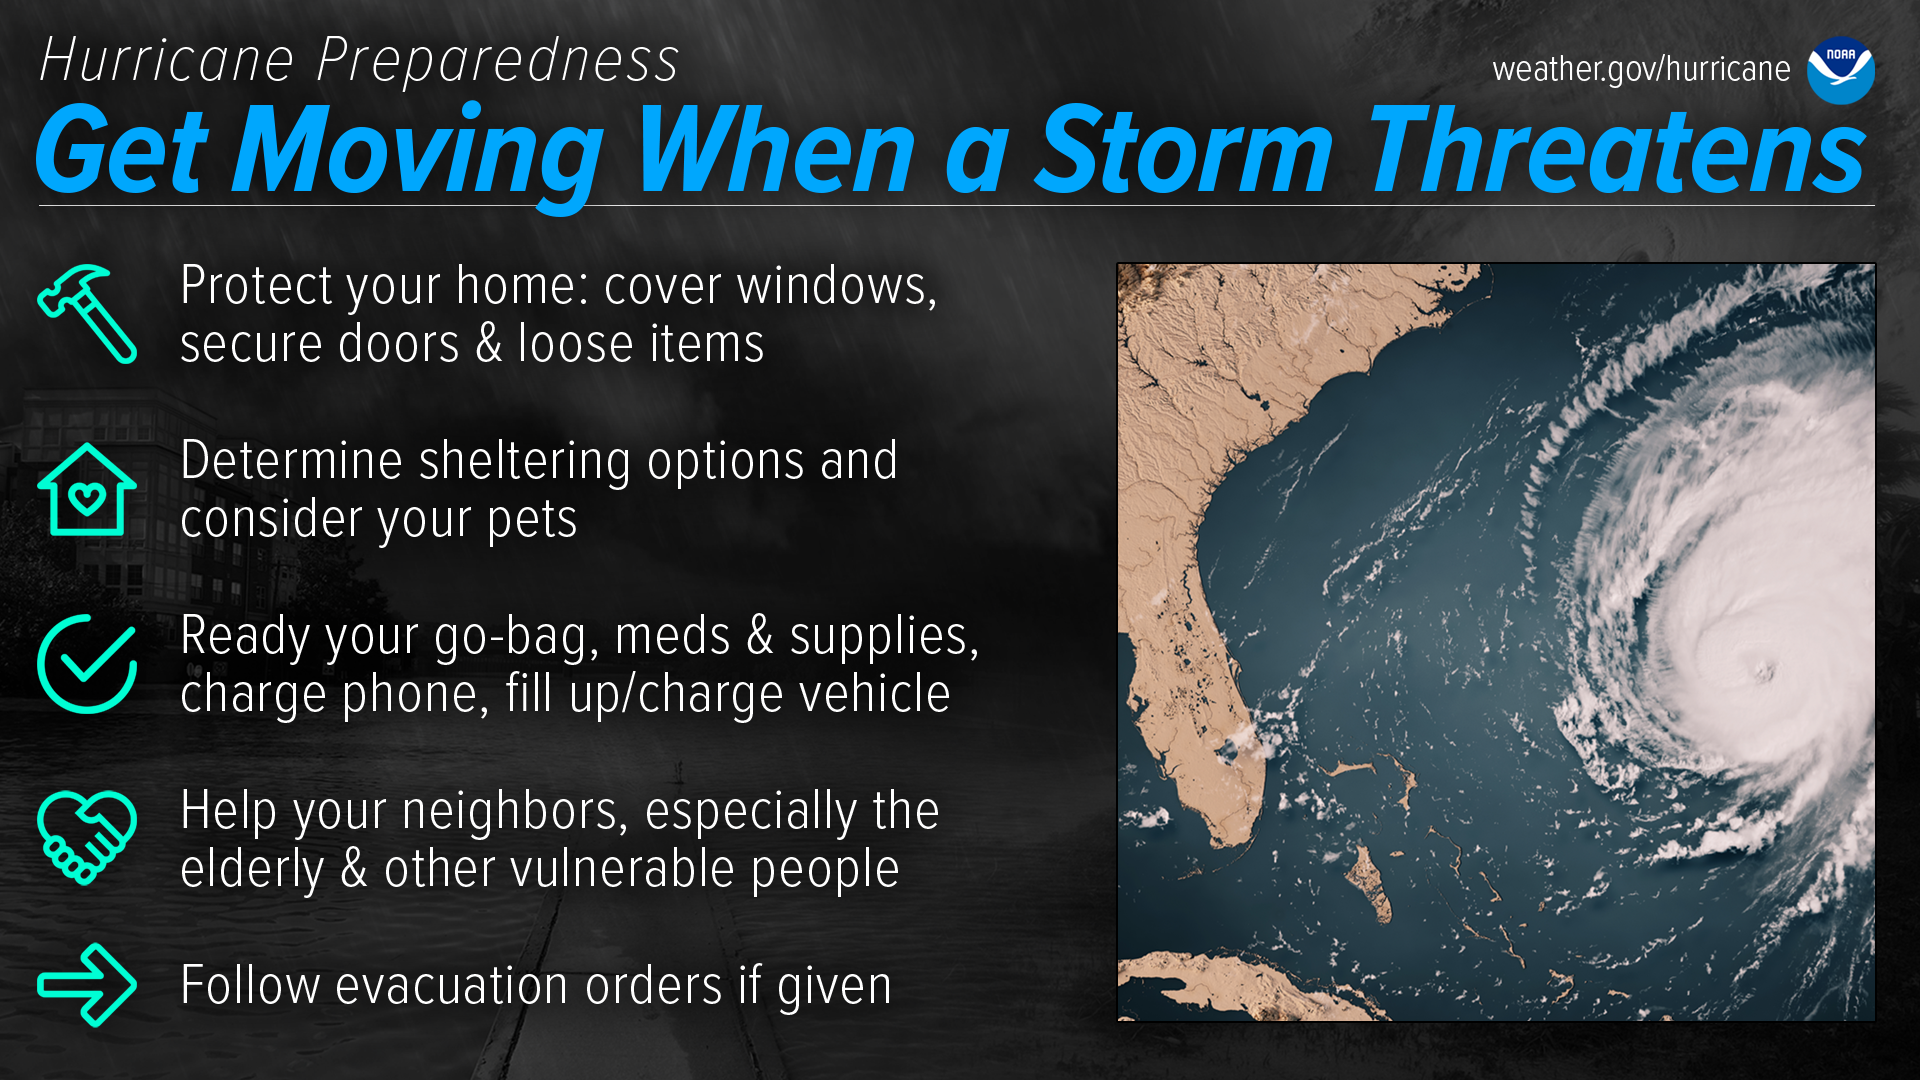 Hurricane Preparedness - Get Moving When a Storm Threatens. Protect your home: cover windows, secure doors and loose items. Determine sheltering options and consider your pets. Ready your go-bag, meds and supplies, charge phone, fill up/charge vehicle. Help your neighbors, especially the elderly & other vulnerable people. Follow evacuation orders if given. Image credit: NOAA's National Weather Service